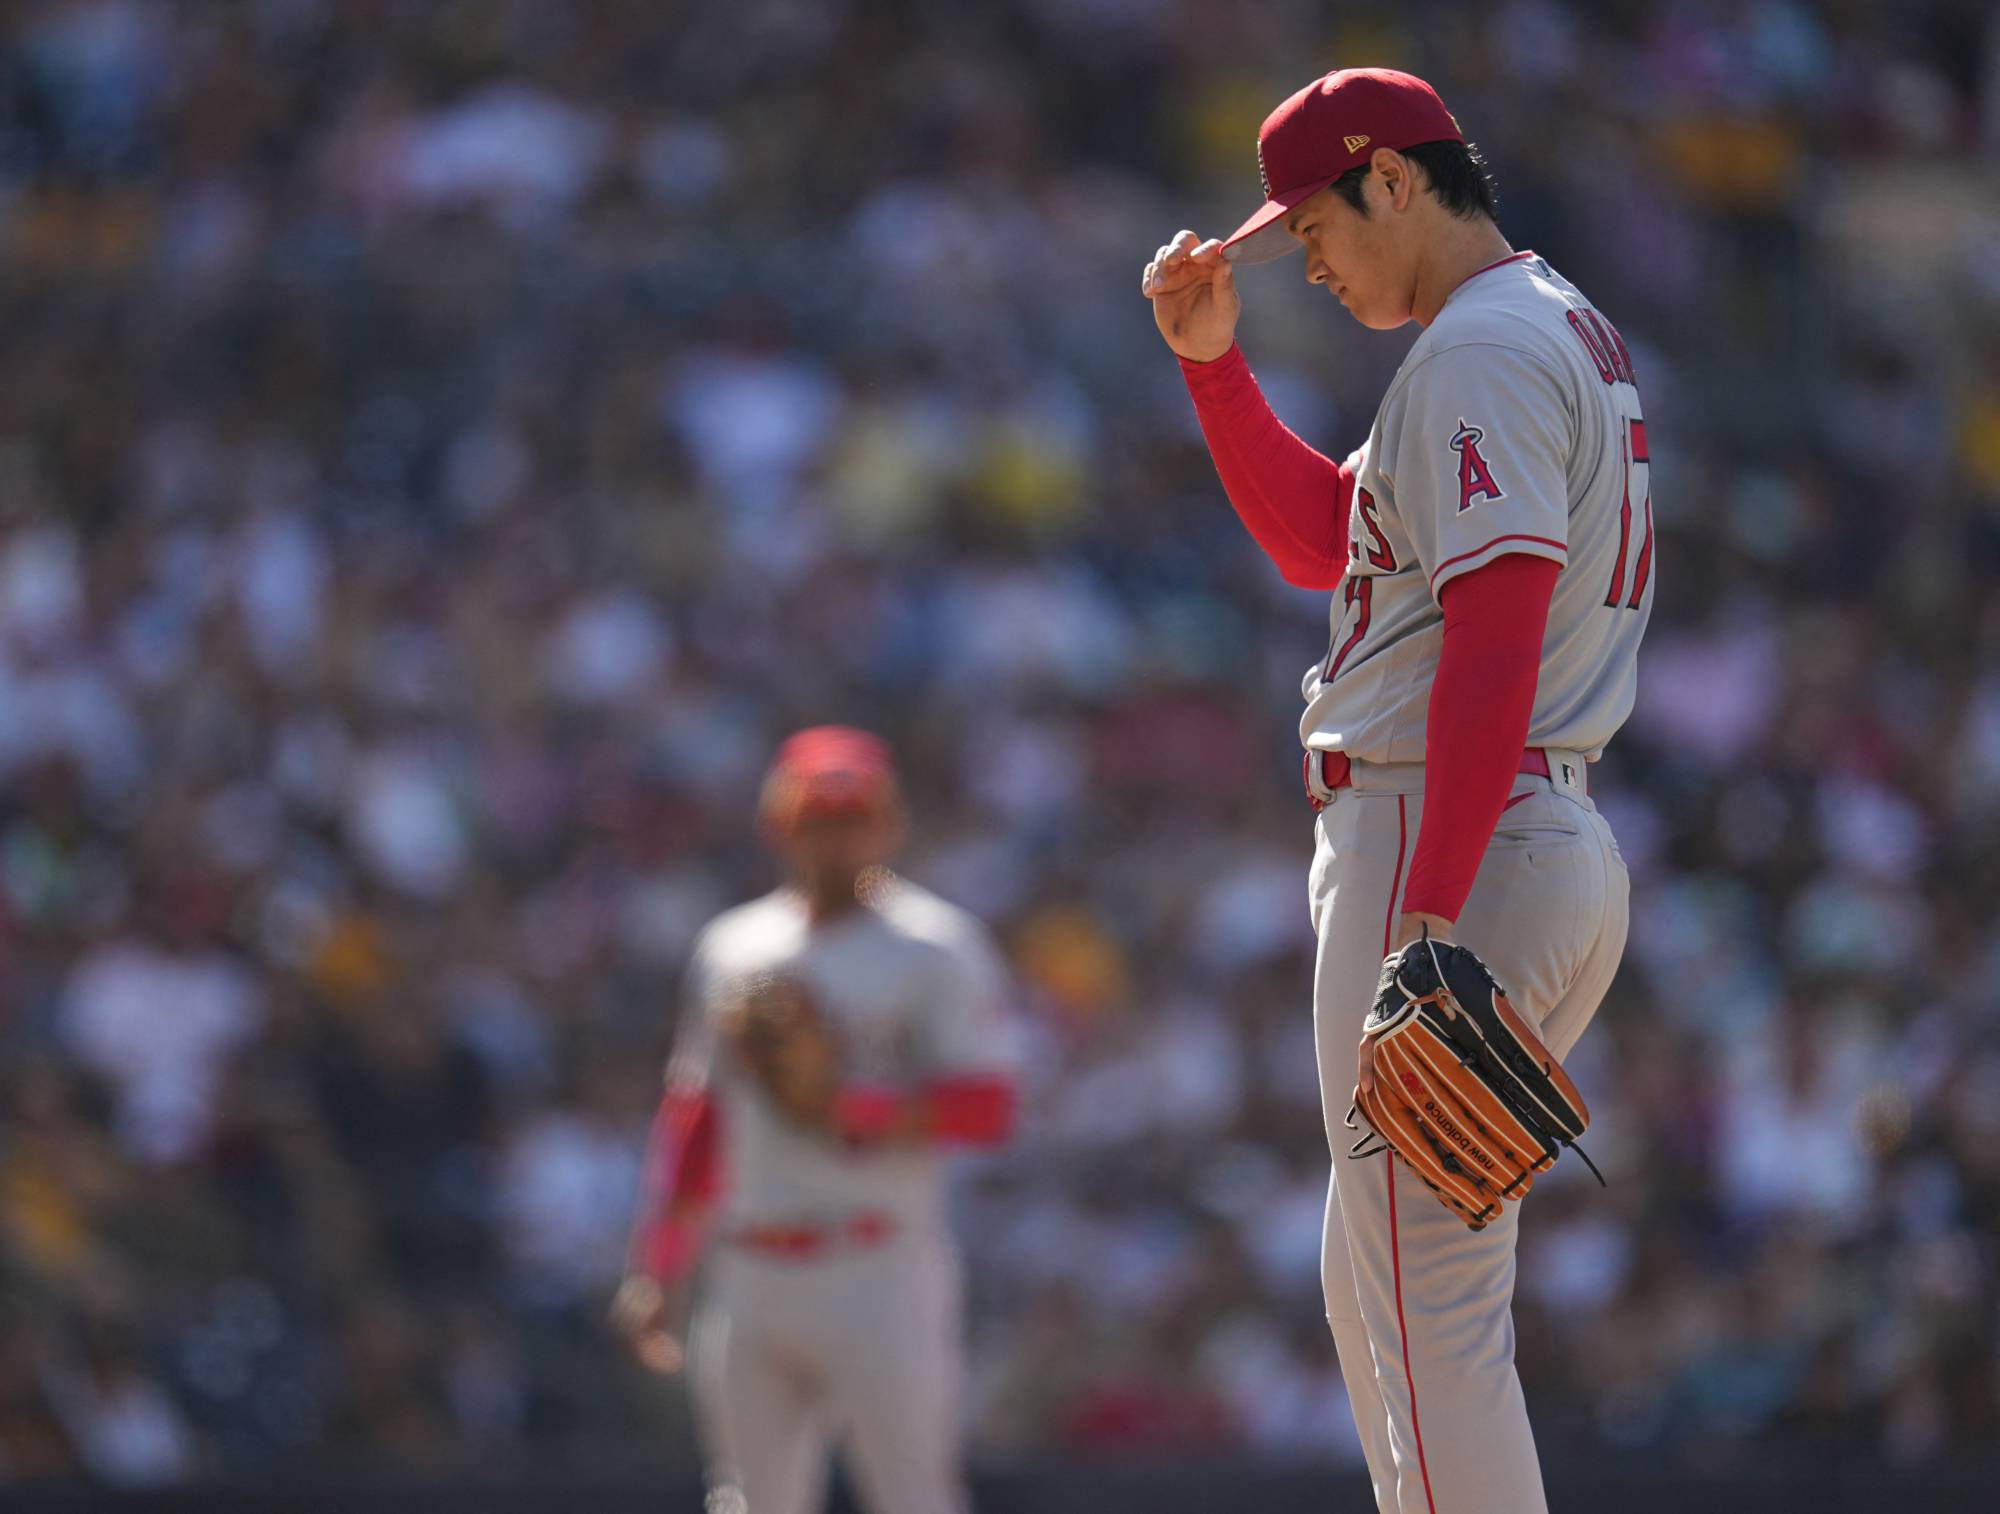 Baseball: Shohei Ohtani goes hitless in American League All-Star defeat